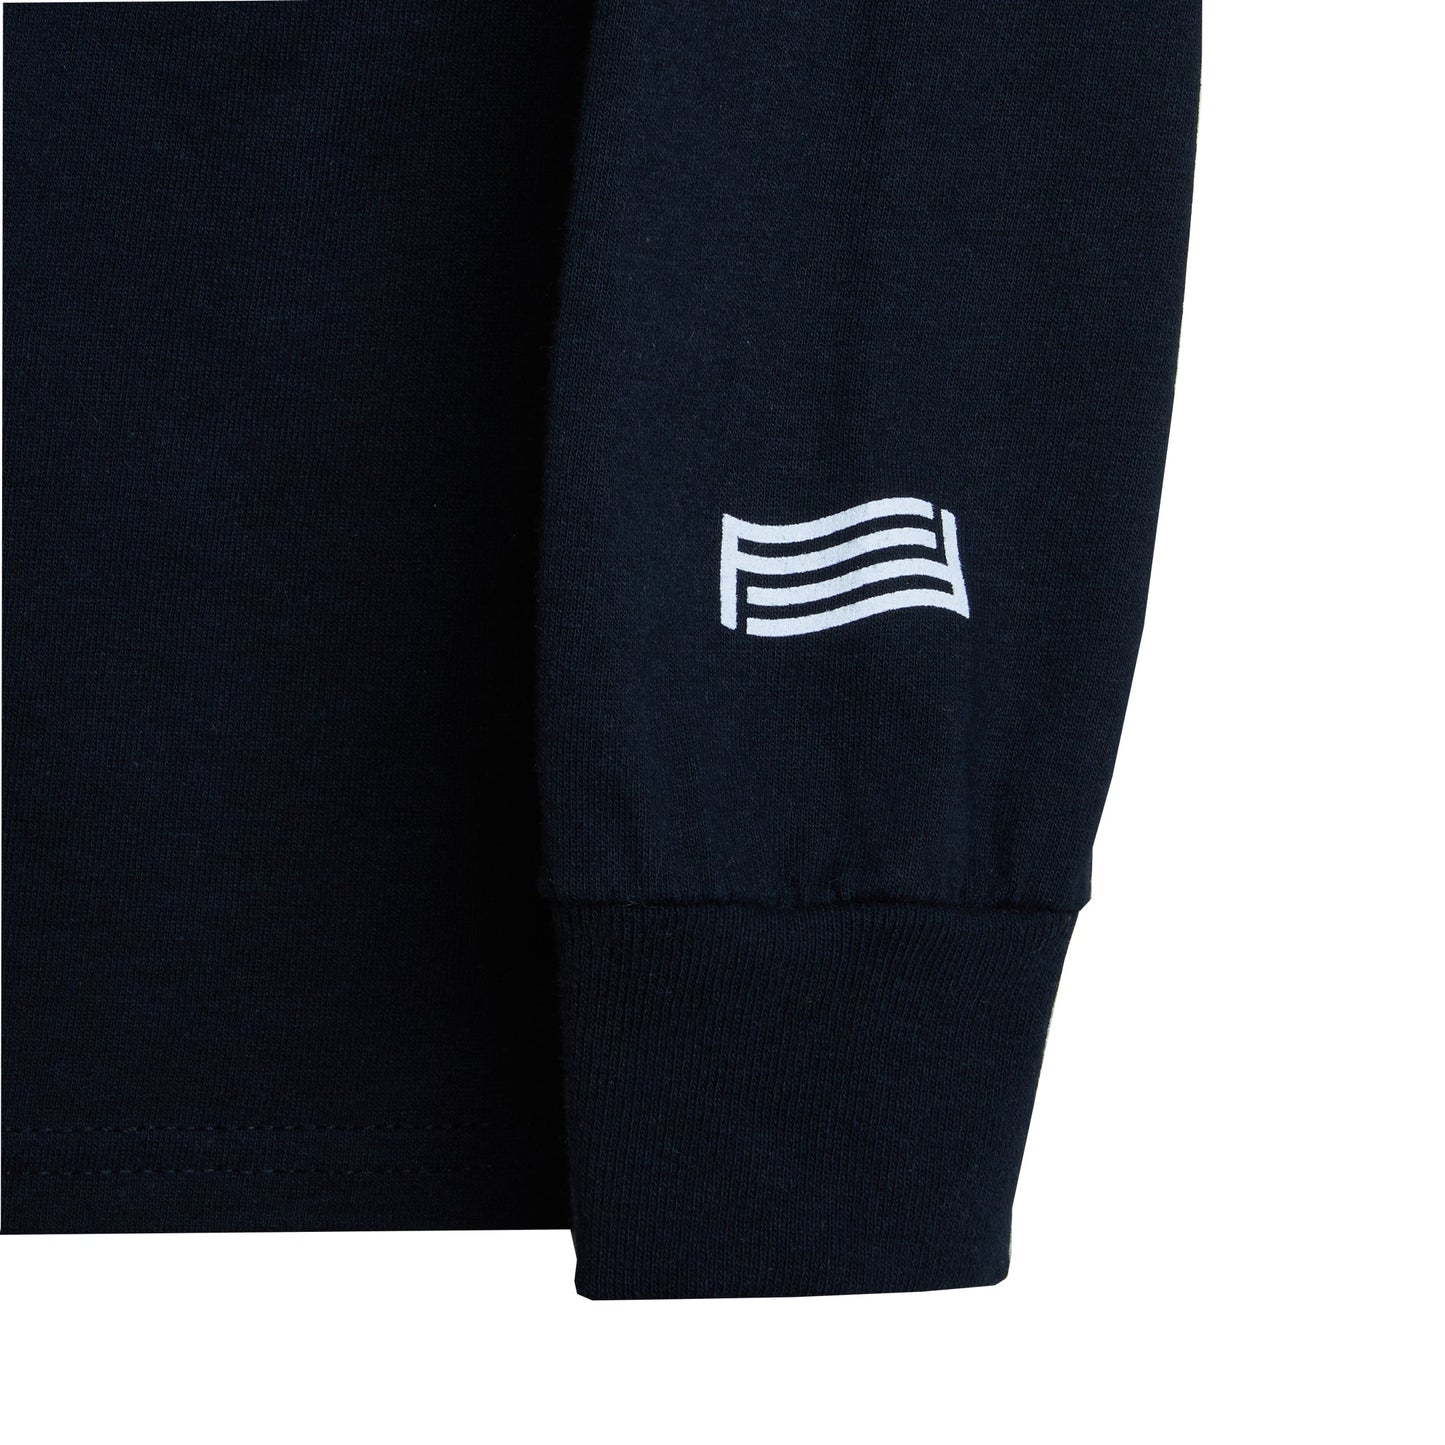 For Freedoms Classic Hoodie